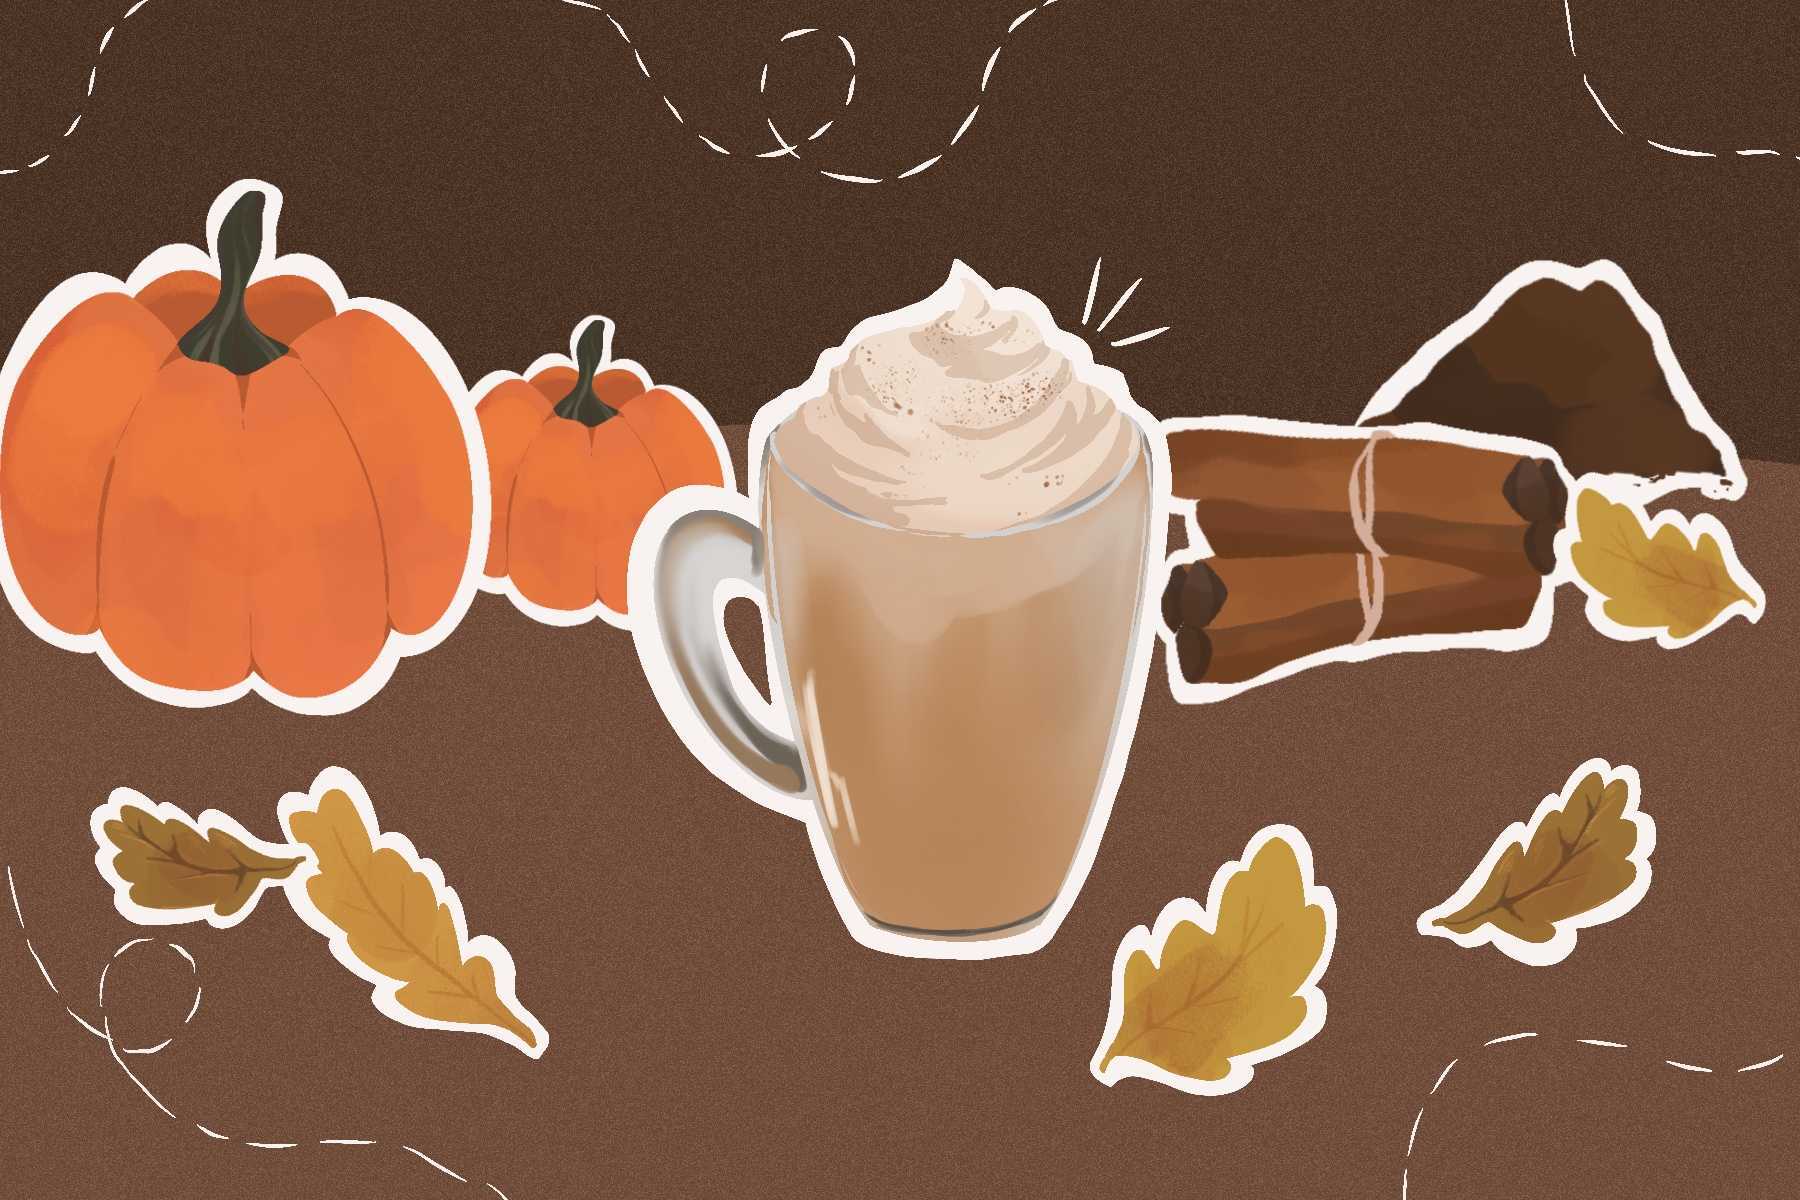 A drawing of a pumpkin spice latte shows pumpkin and cinnamon lurking behind the tasty drink